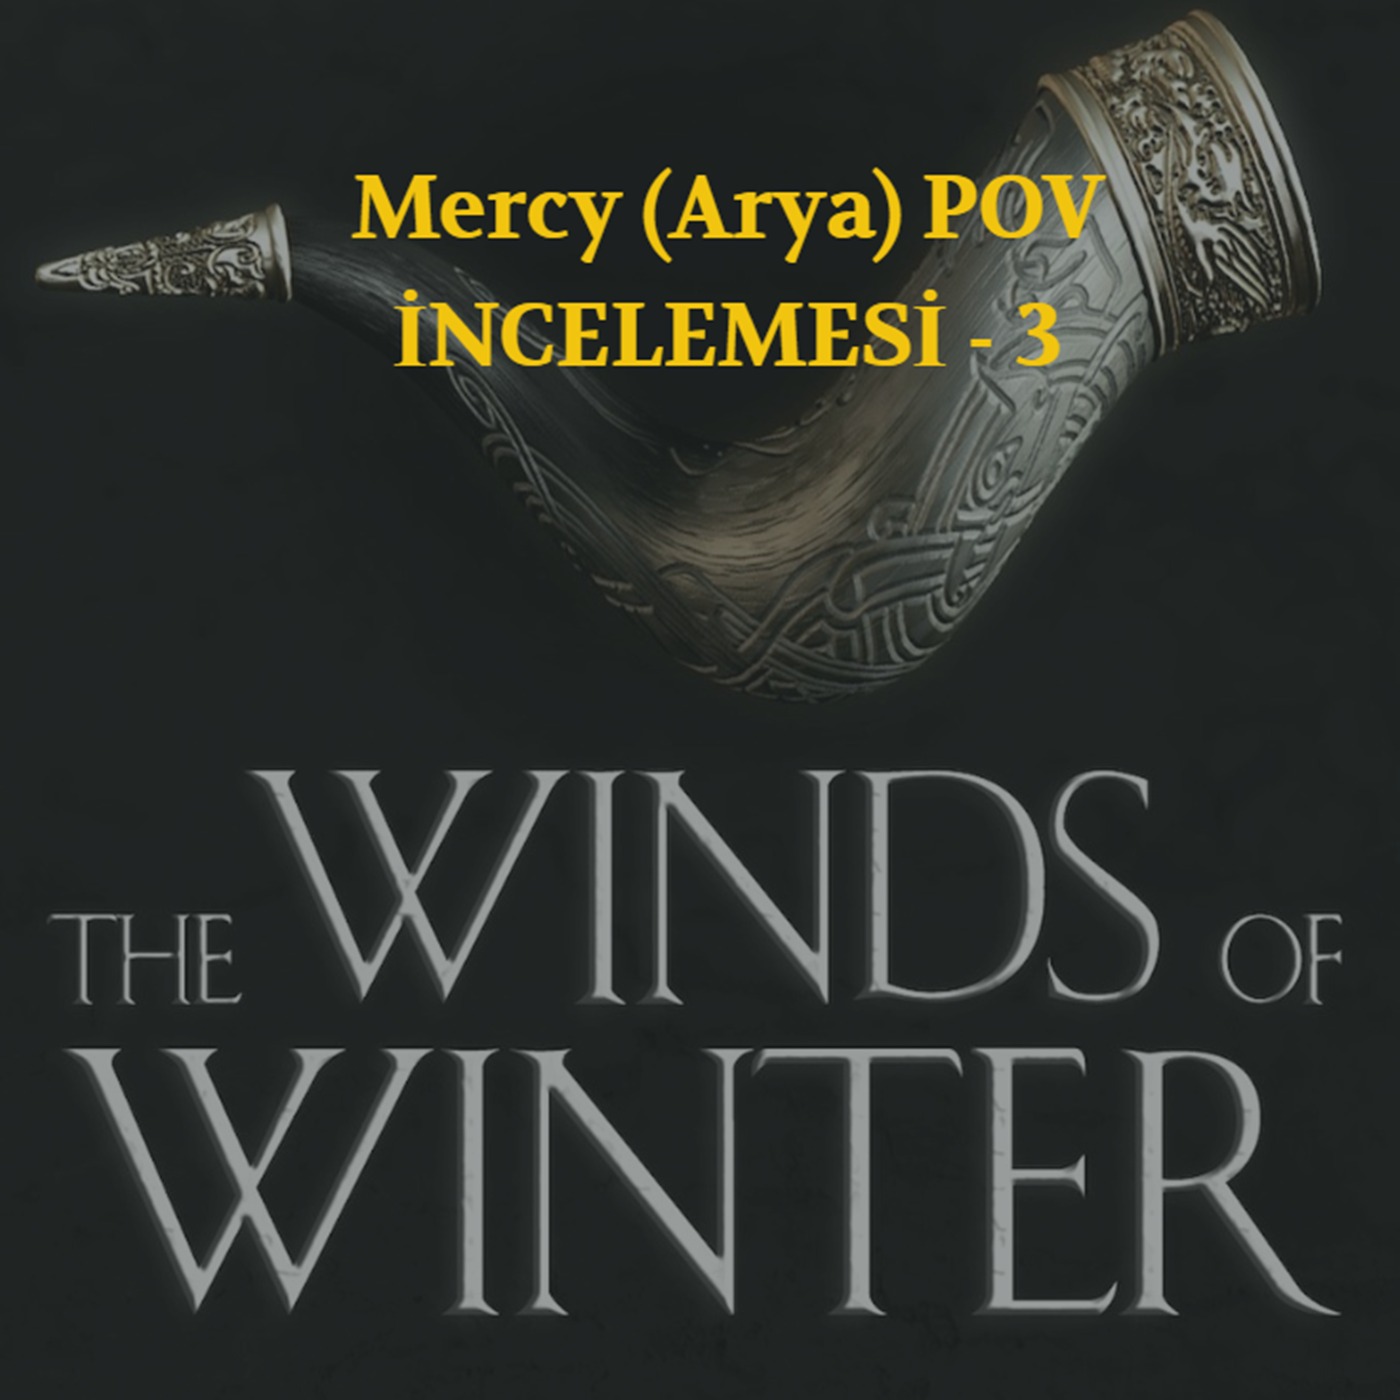 The Winds of Winter 